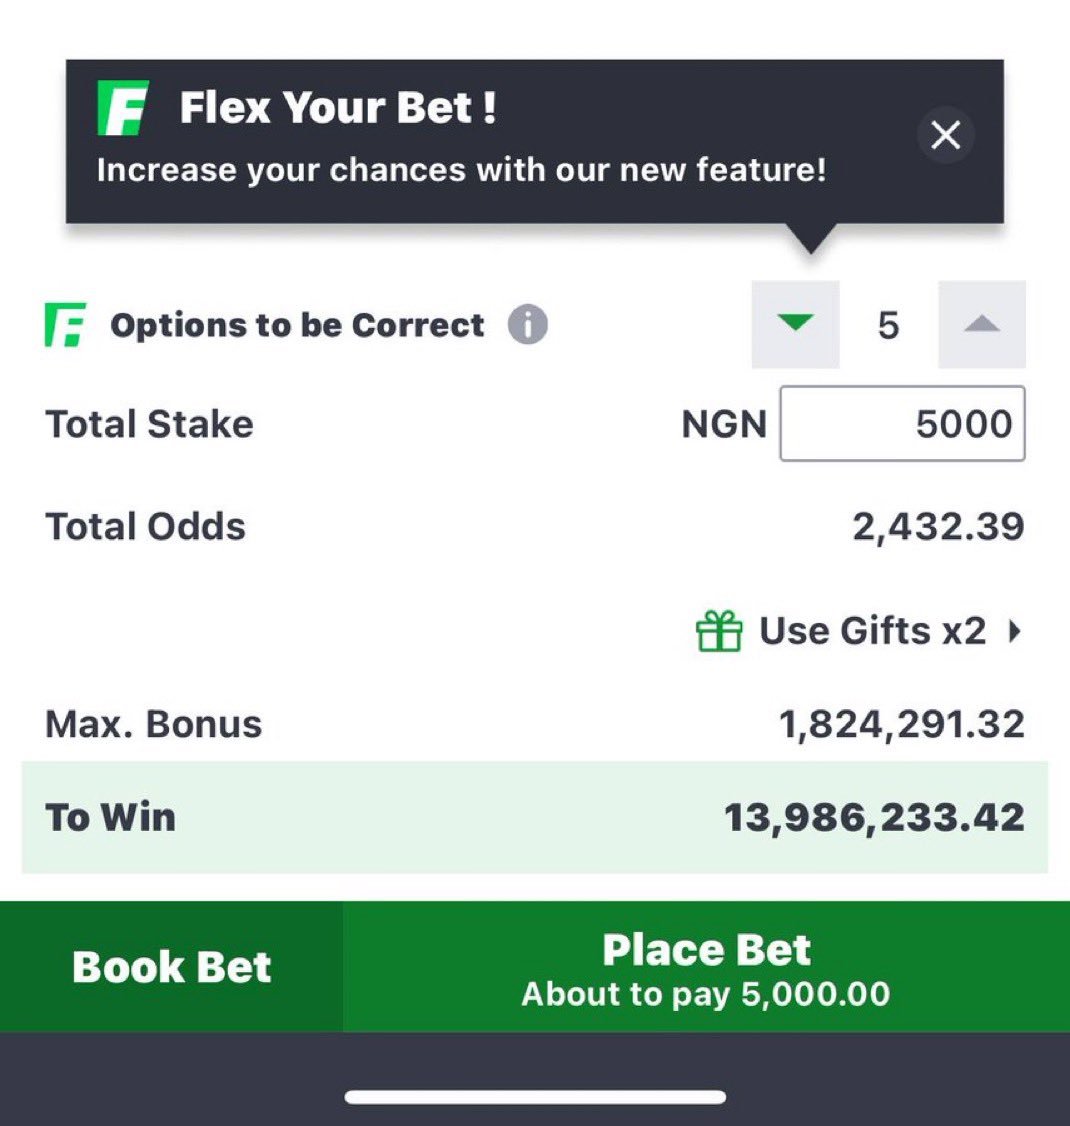 Another 13m on Sportybet 📢 Football, Cricket Basketball and Volleyball mixed starting from soon and ends today [ 2.4kOdds]. I spent over 5hrs analyzing this game t.me/+-We5n8RzT_g3Y… t.me/+-We5n8RzT_g3Y… Go & Play. Let's make it back to back t.me/+-We5n8RzT_g3Y…